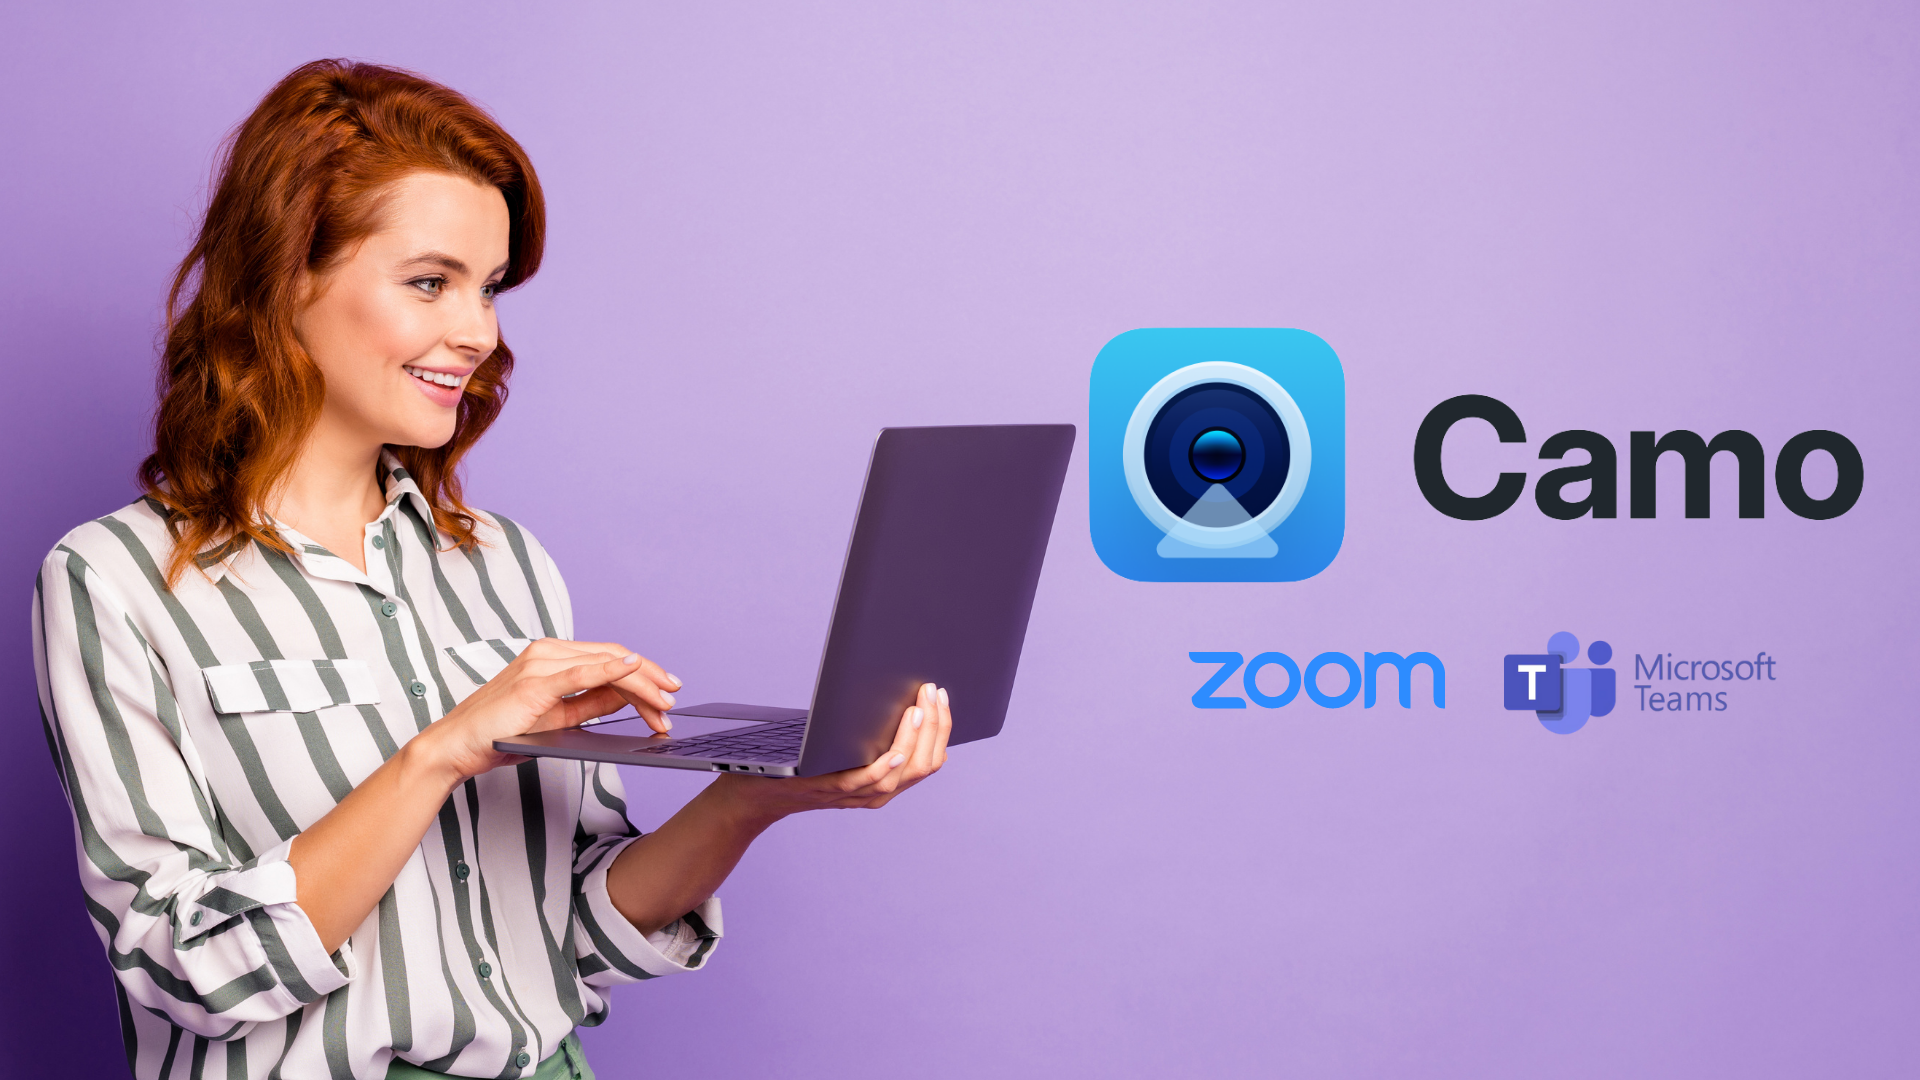 Smartphone for Microsoft Teams and Zoom CC Thumbnail